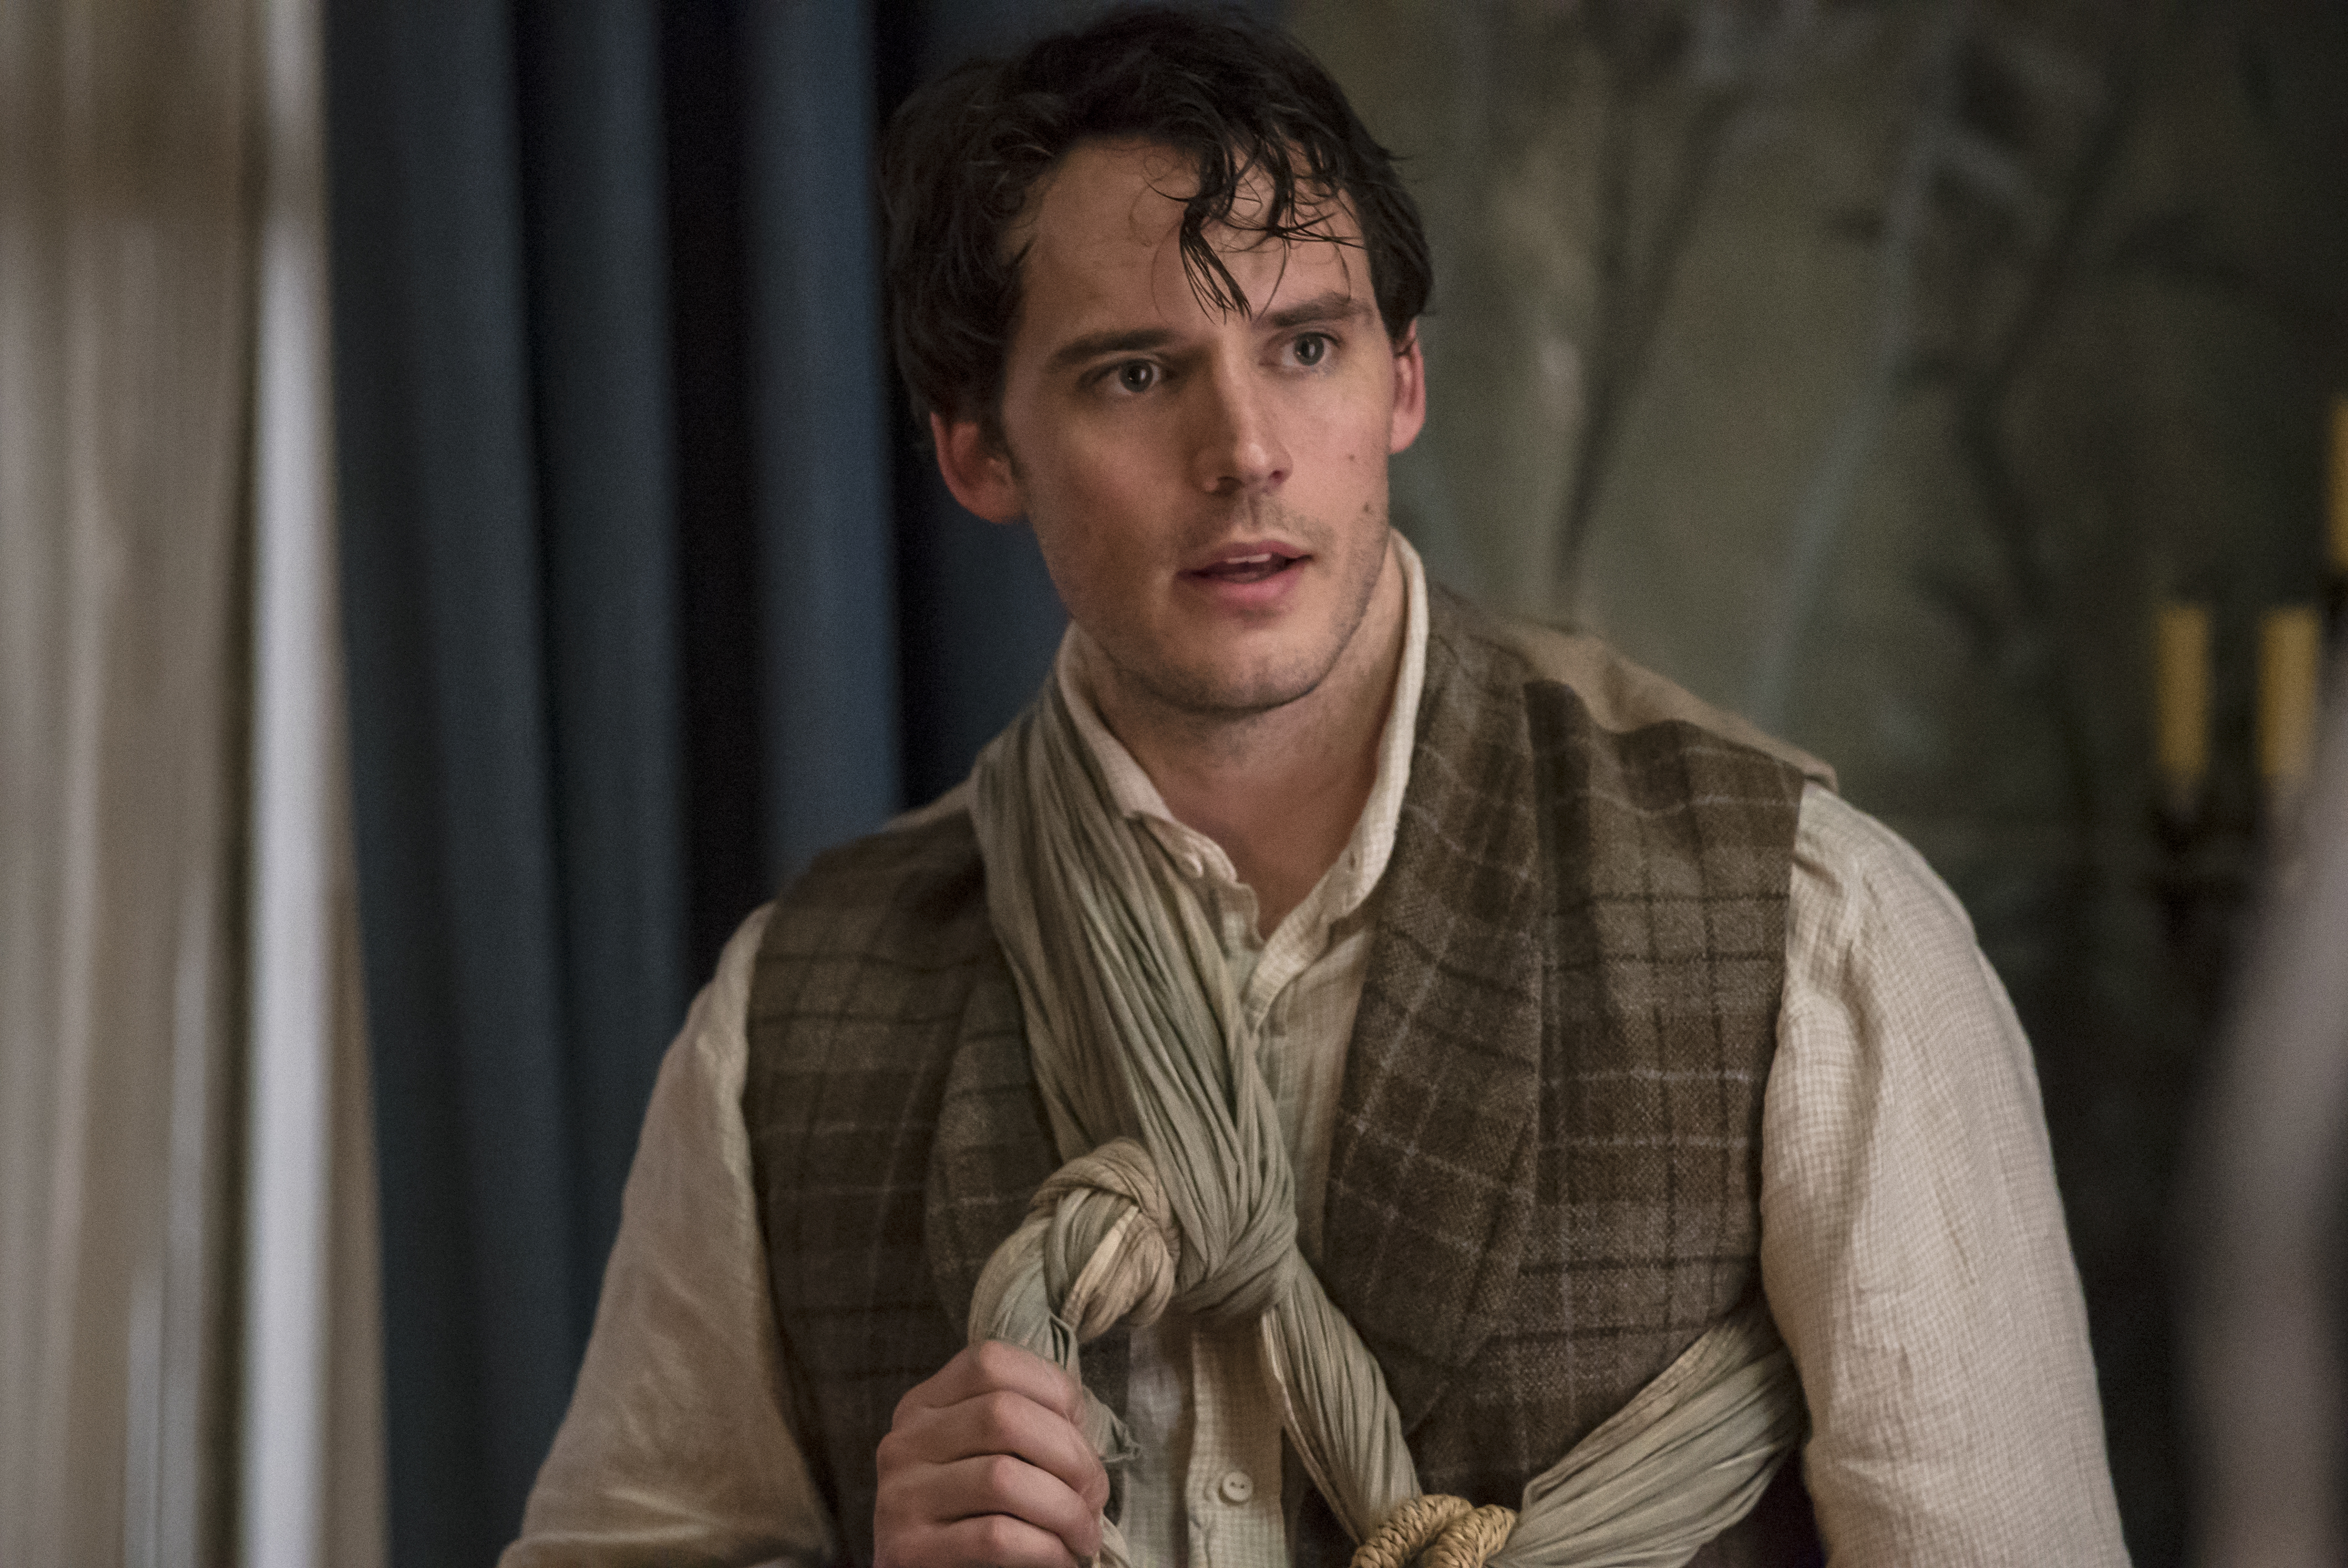  Sam Claflin as &quot;Philip&quot; in MY COUSIN RACHEL. Photo by Nicola Dove. &copy; 2016 Twentieth Century Fox Film Corporation All Rights Reserved 